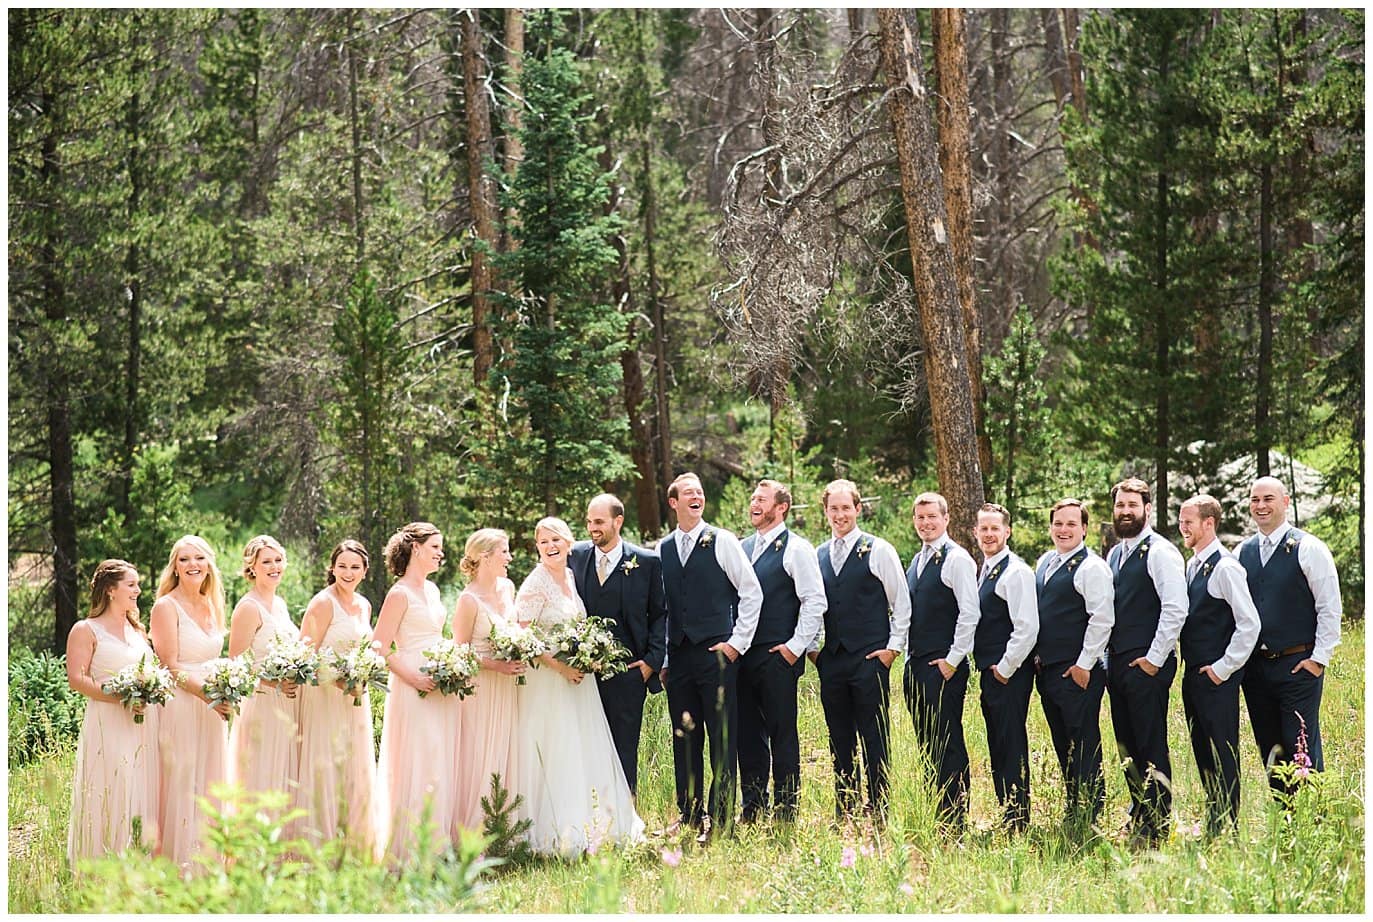 bridal party at Vail mountain wedding at Piney River Ranch wedding by Beaver Creek Wedding photographer Jennie Crate, Photographer